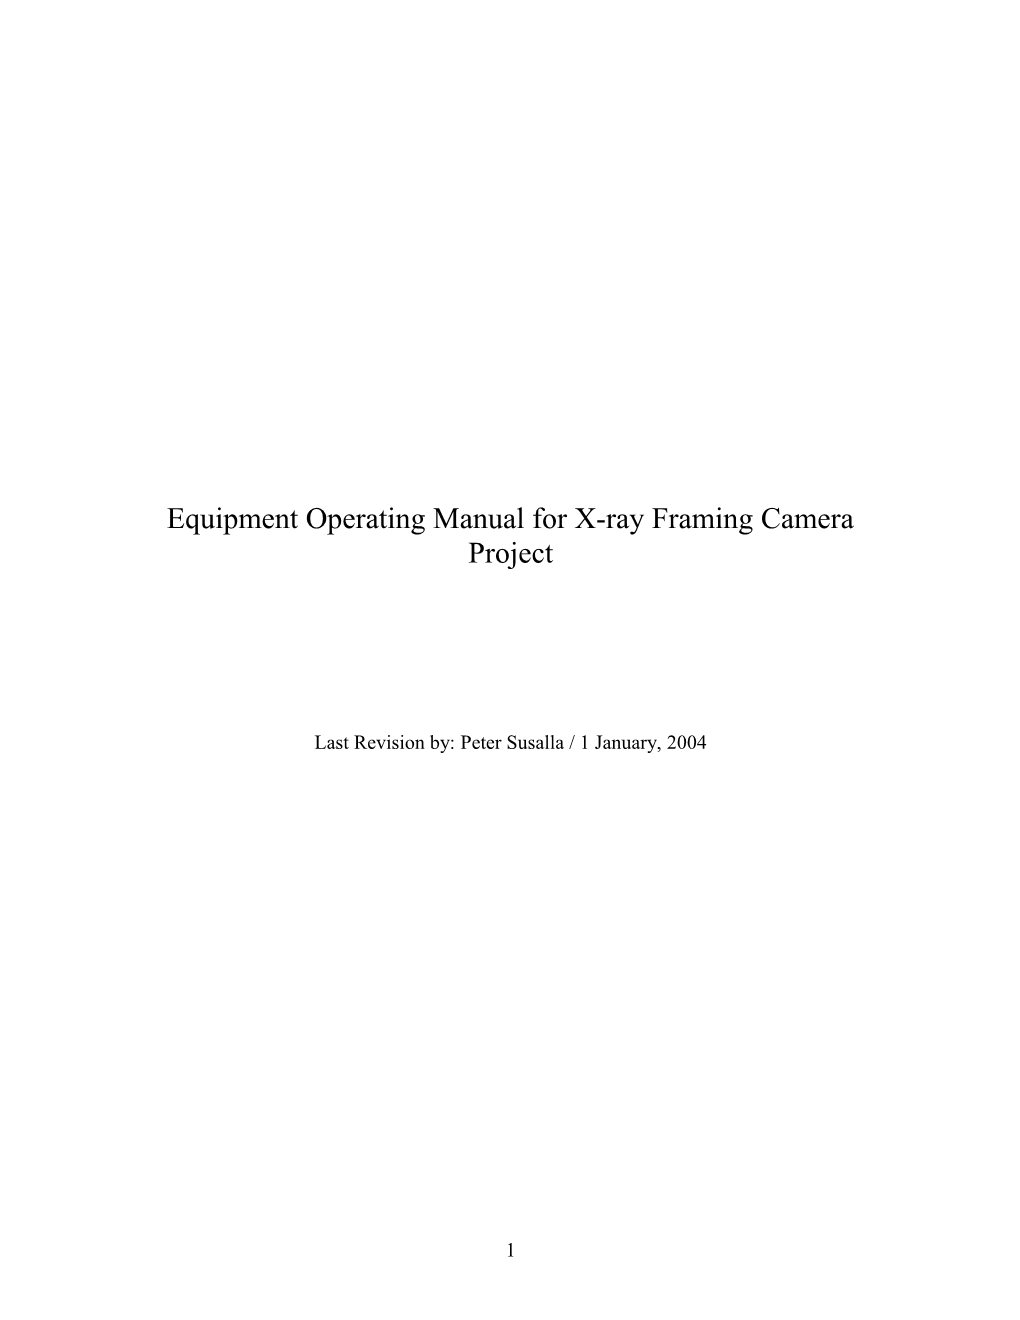 Equipment Operation Manual for X-Ray Framing Camera Project